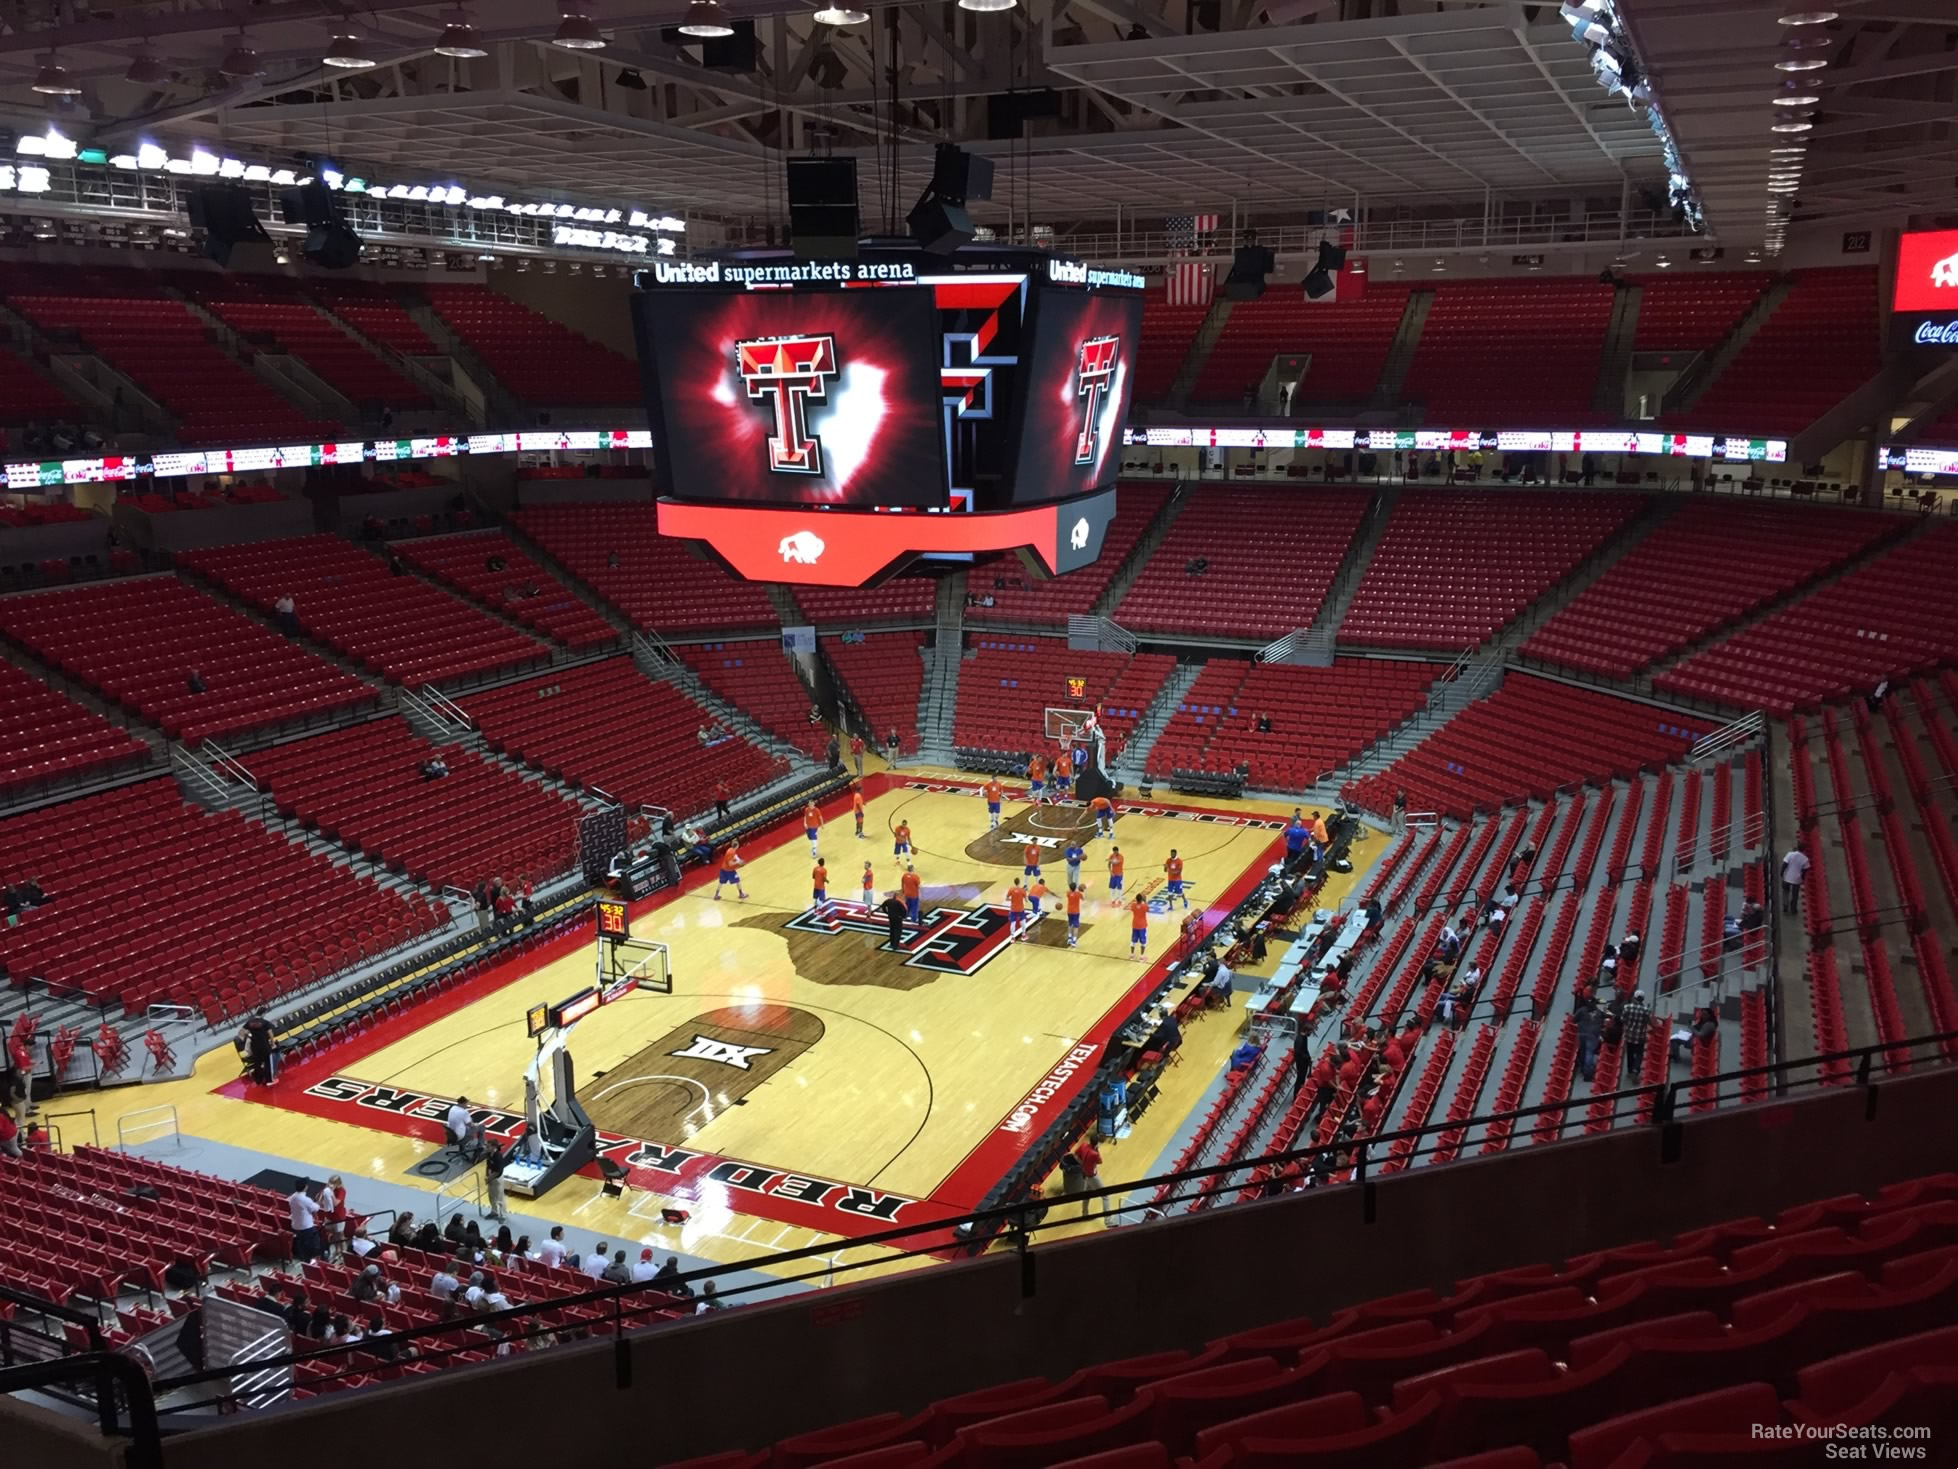 section 221, row 7 seat view  - united supermarkets arena